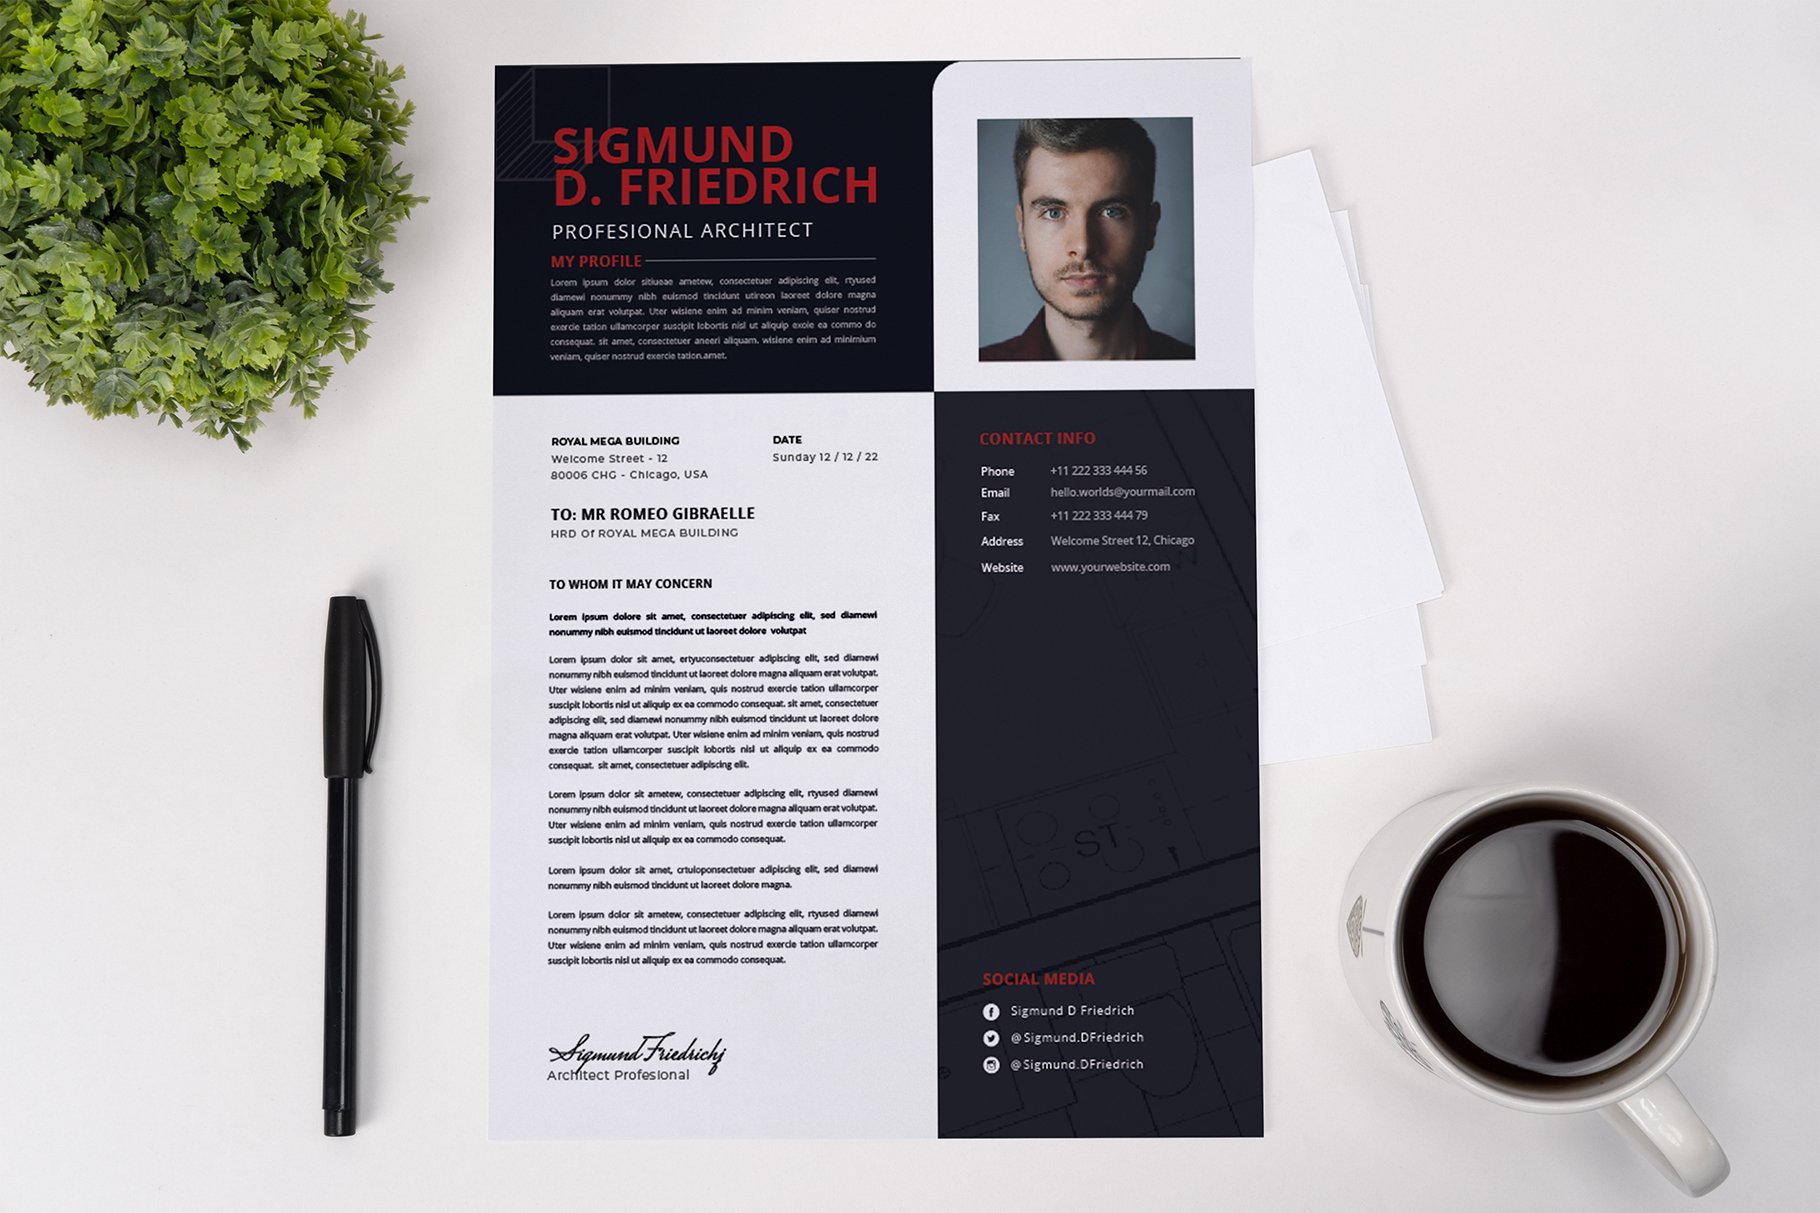 Black and white resume on a table next to a cup of coffee.